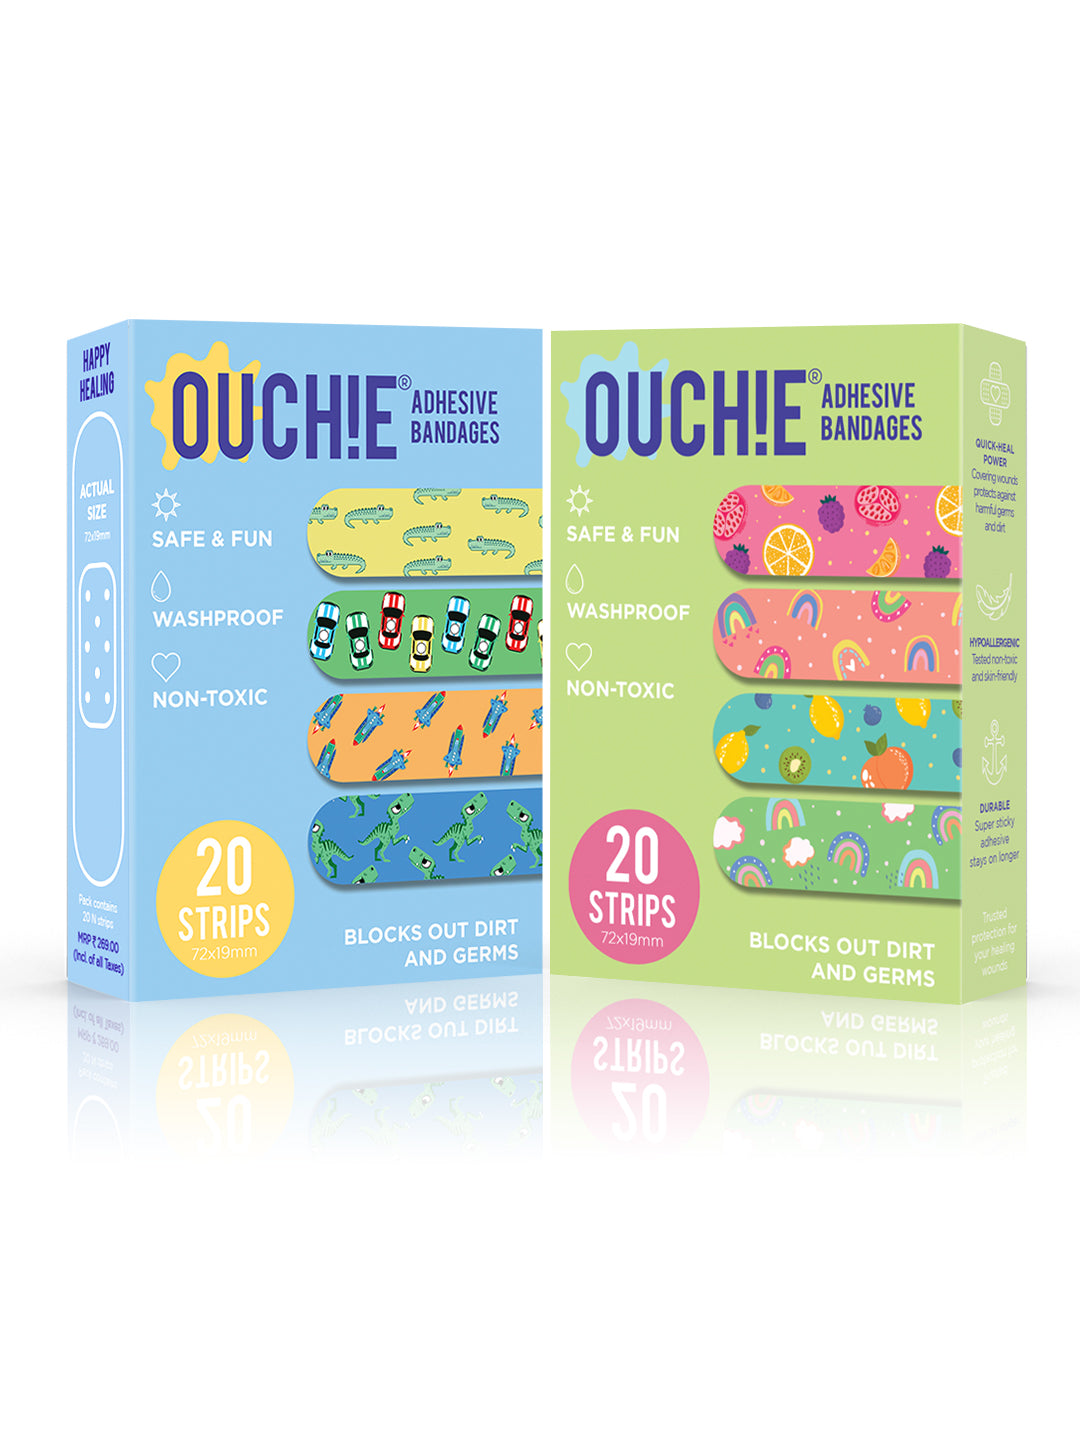 Ouchie Non-Toxic Printed Bandages Double Combo Set (40 Pack) - Blue & Lime Green